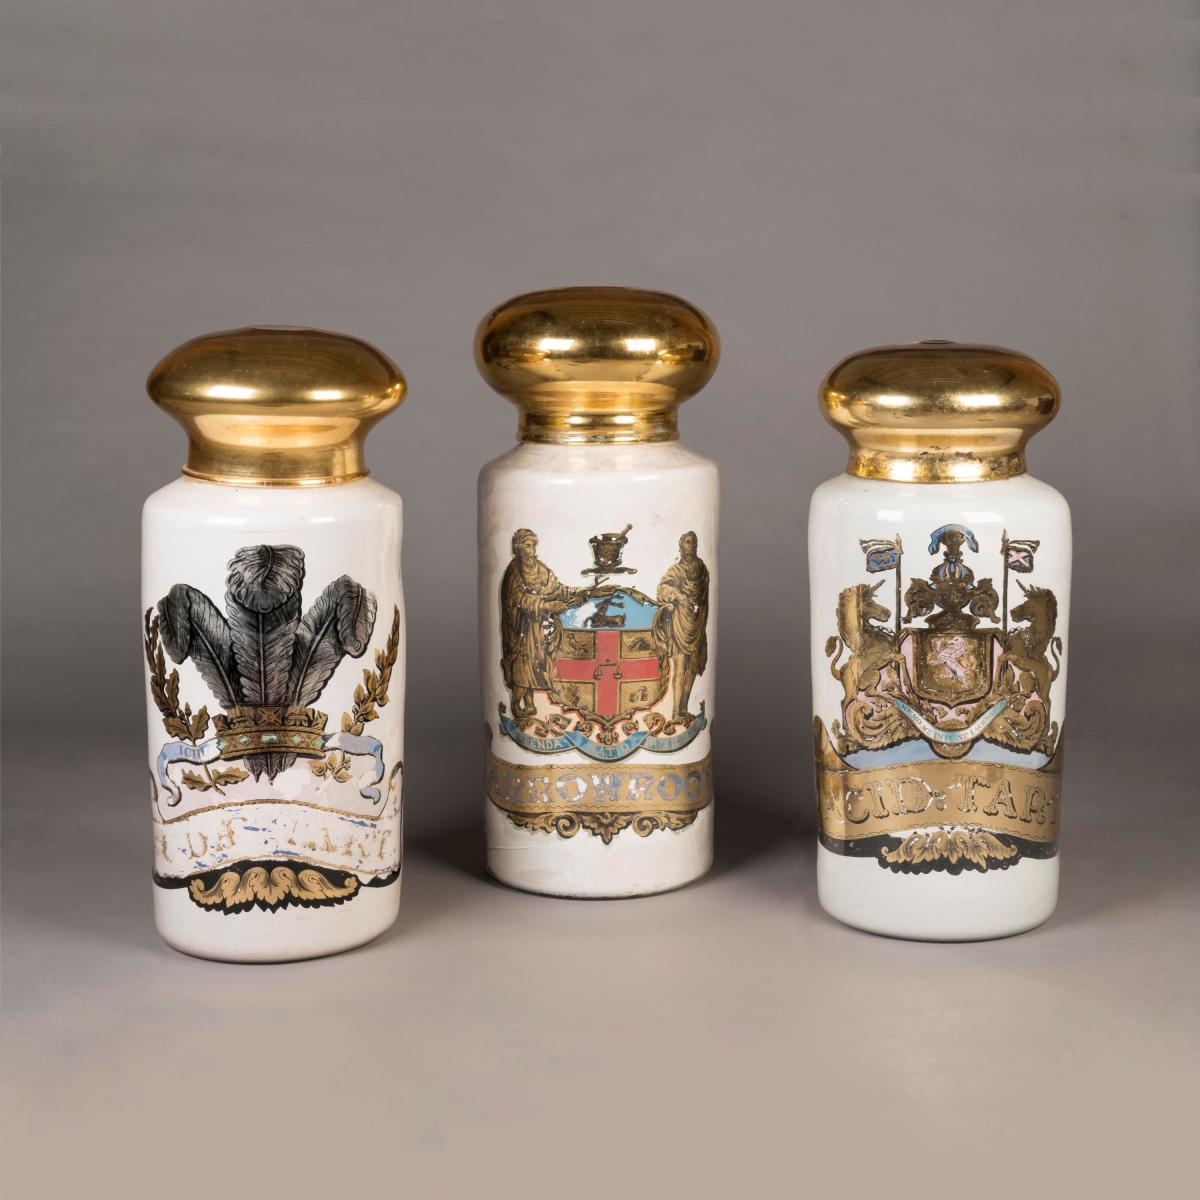 Three Large Hand-Painted Apothecary Jars